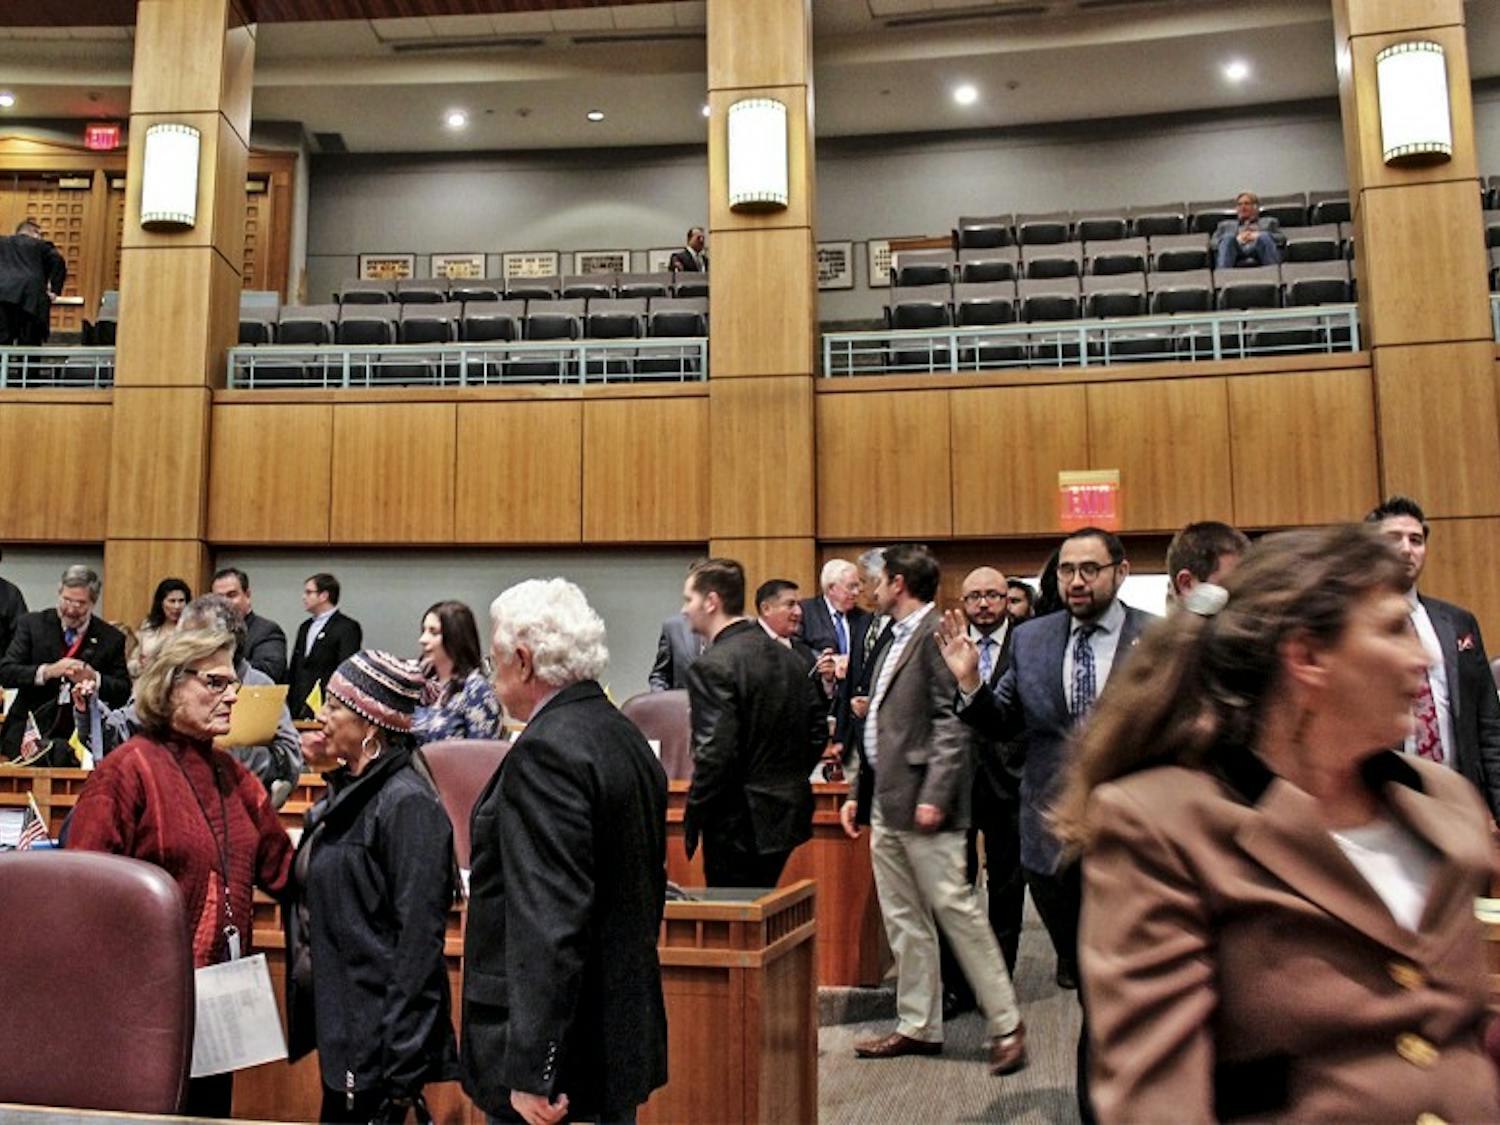 Legislators, reporters, photographers and the public mingle and mumble as they make their way out of the Senate Chamber at the Santa Fe Roundhouse on Feb. 15, 2018. Senators chose not to move forward that morning with a bill that could have given Lottery Scholarship recipients more aid each year.